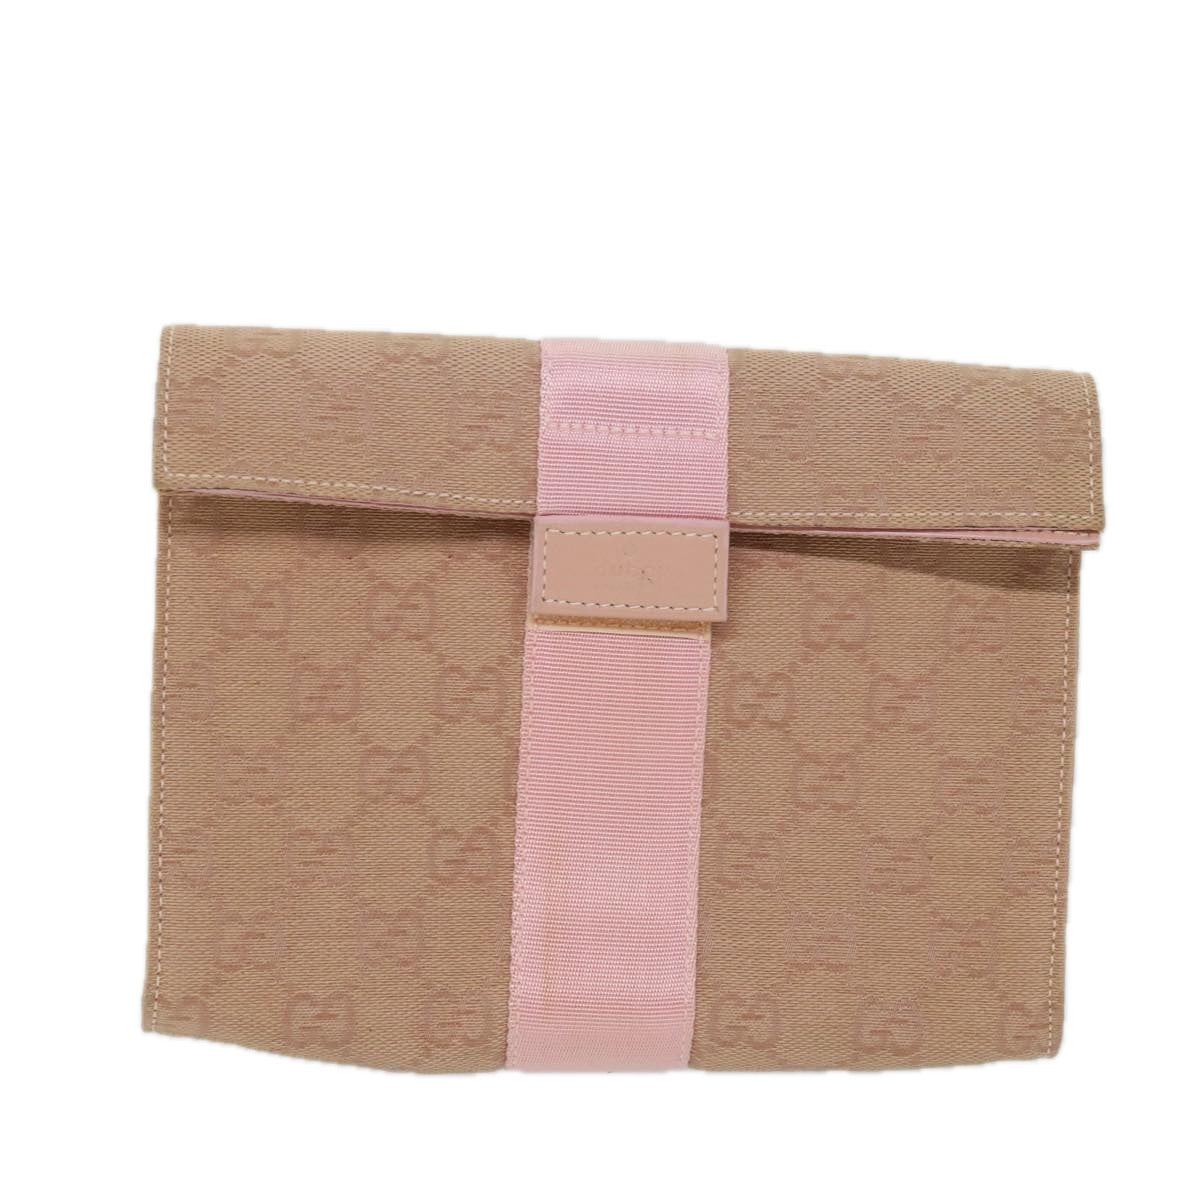 GUCCI GG Canvas Clutch Bag Pink 039 0992 Auth 69230 - 0